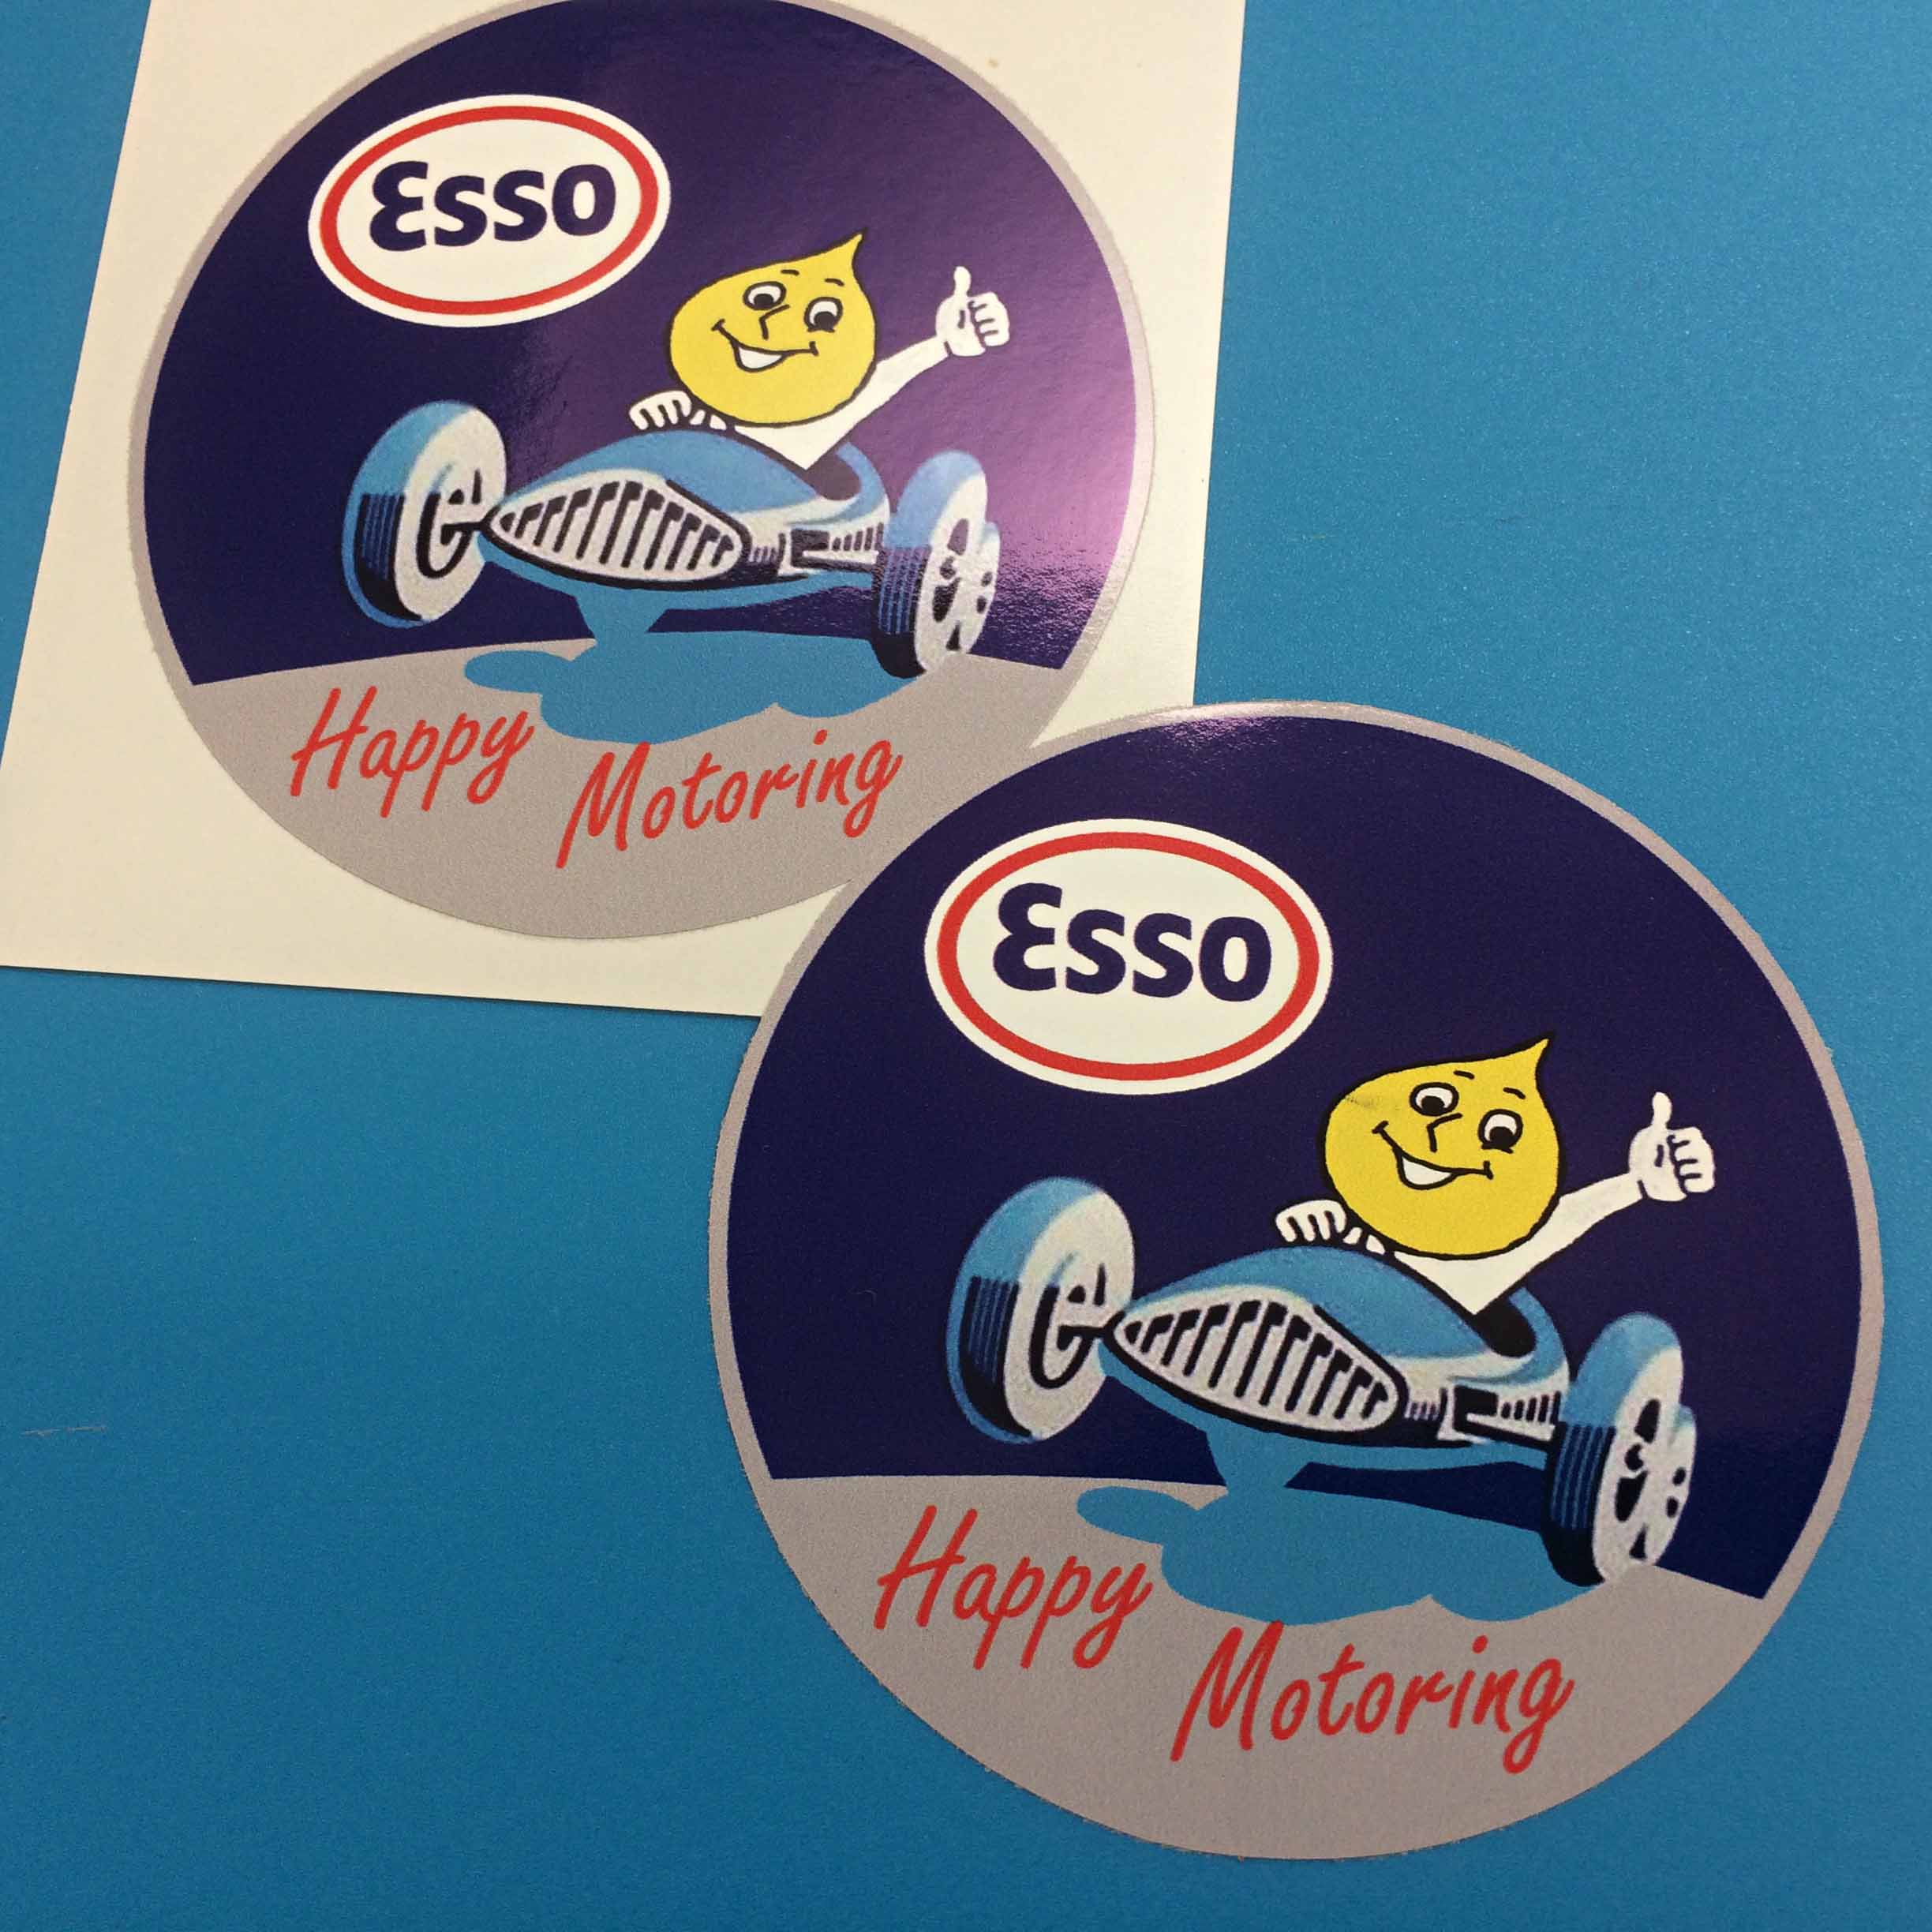 ESSO HAPPY MOTORING STICKERS. The Esso Oil Drop Man driving a blue sports car while giving the thumbs up. The Esso logo and Happy Motoring in red lettering is above and below.